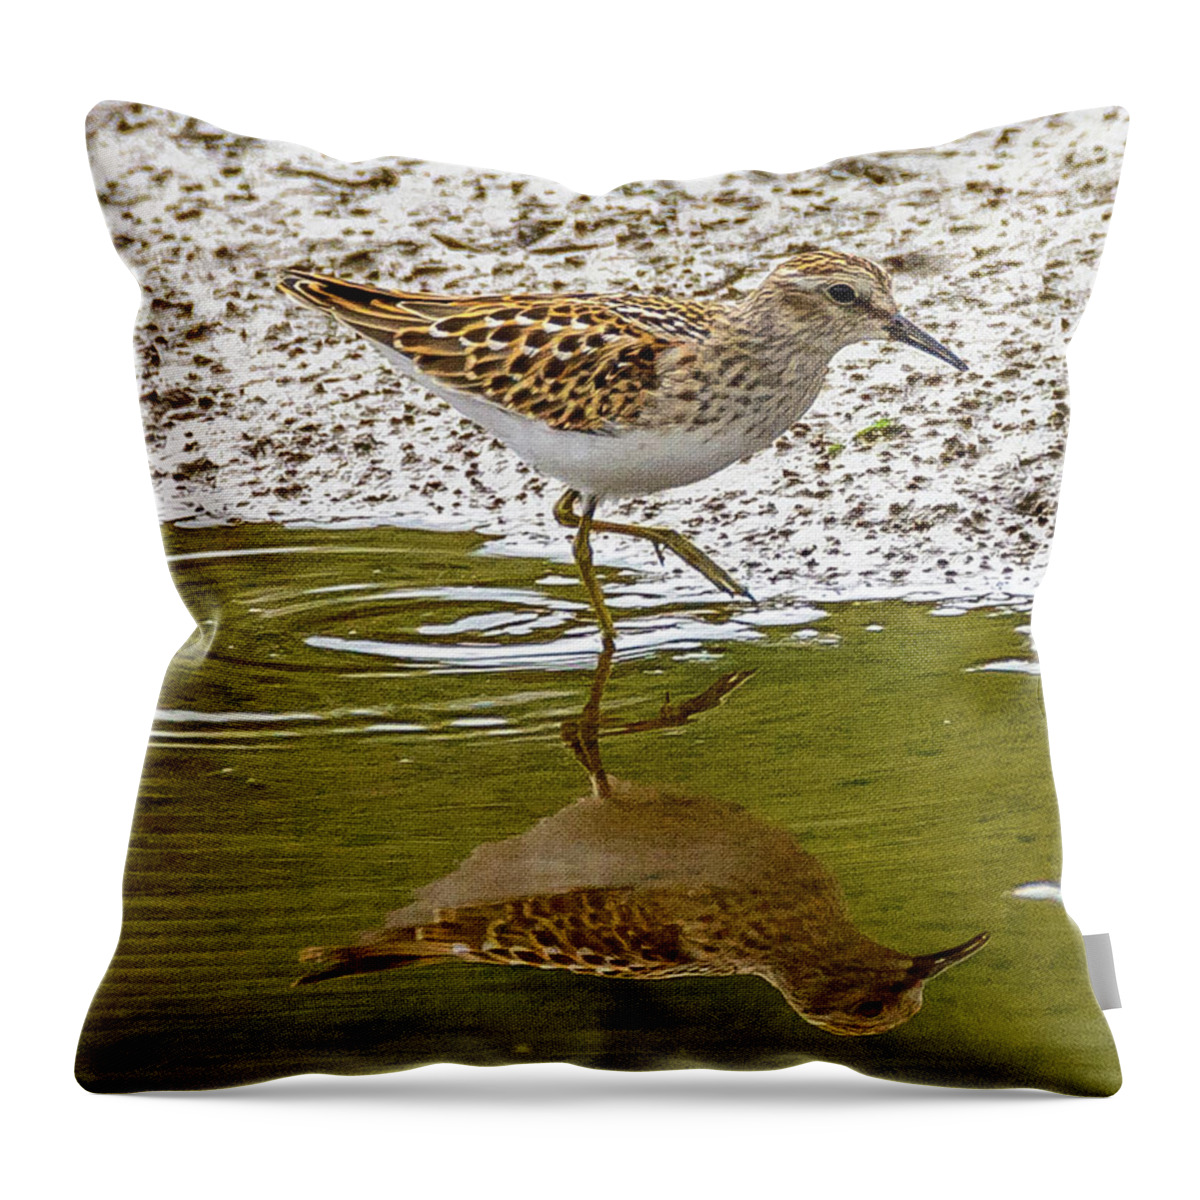 Sandpiper Throw Pillow featuring the photograph Lest Sandpiper by Jerry Cahill